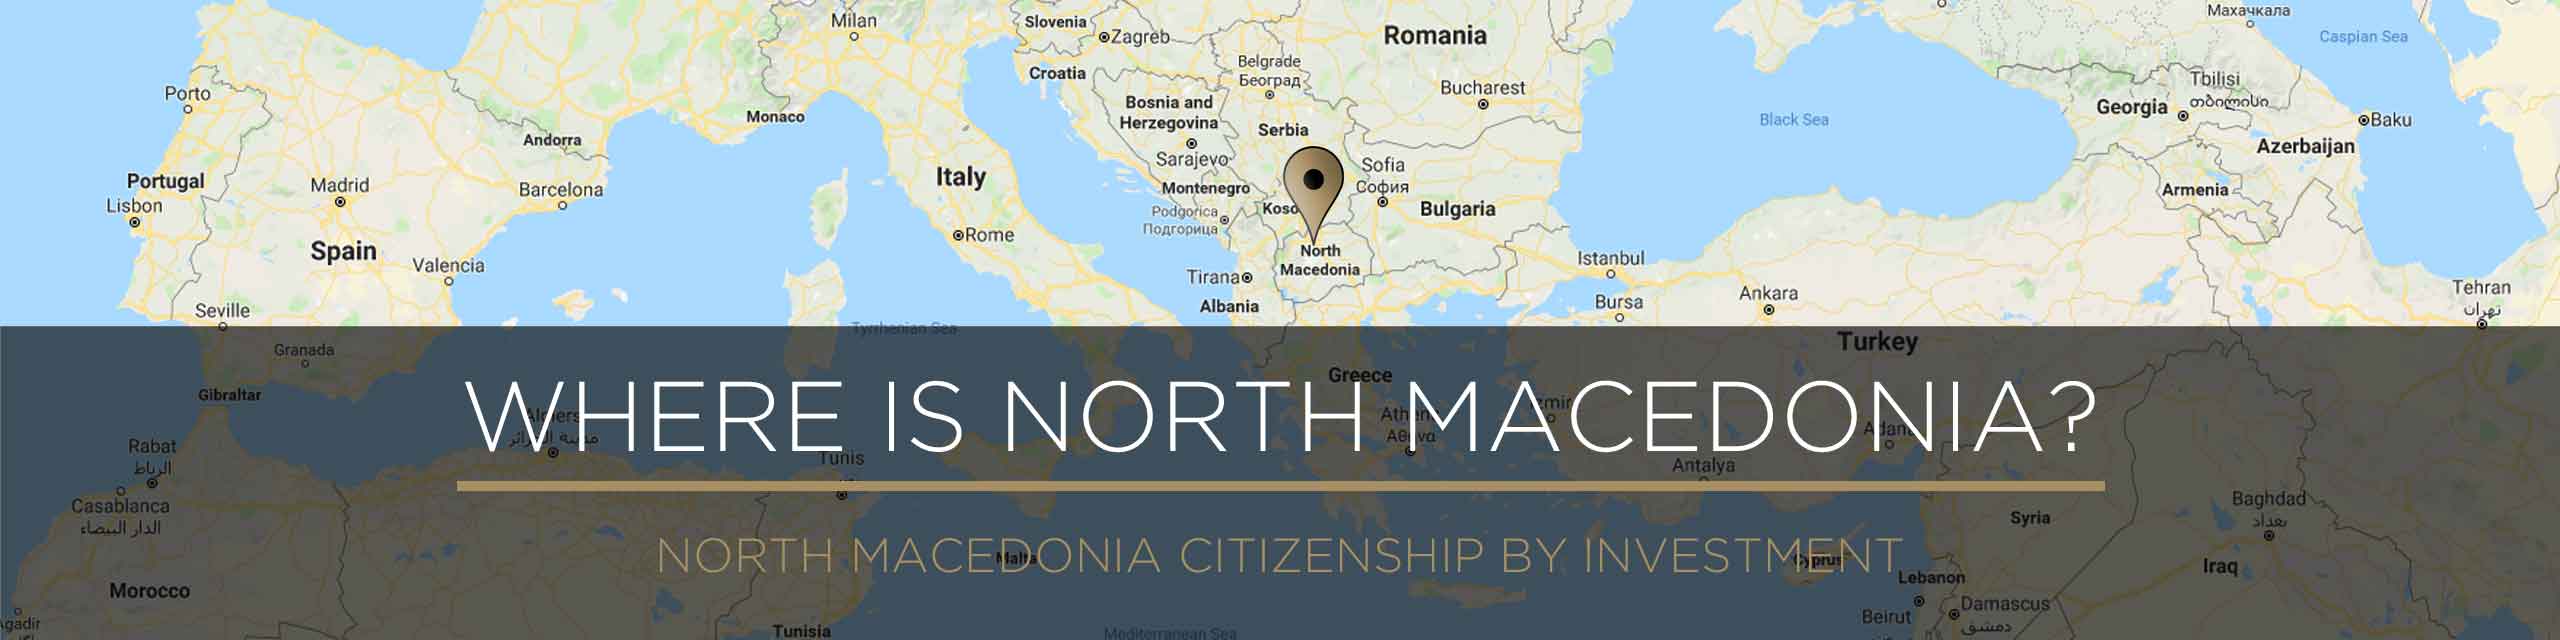 Where is North Macedonia located in the world?